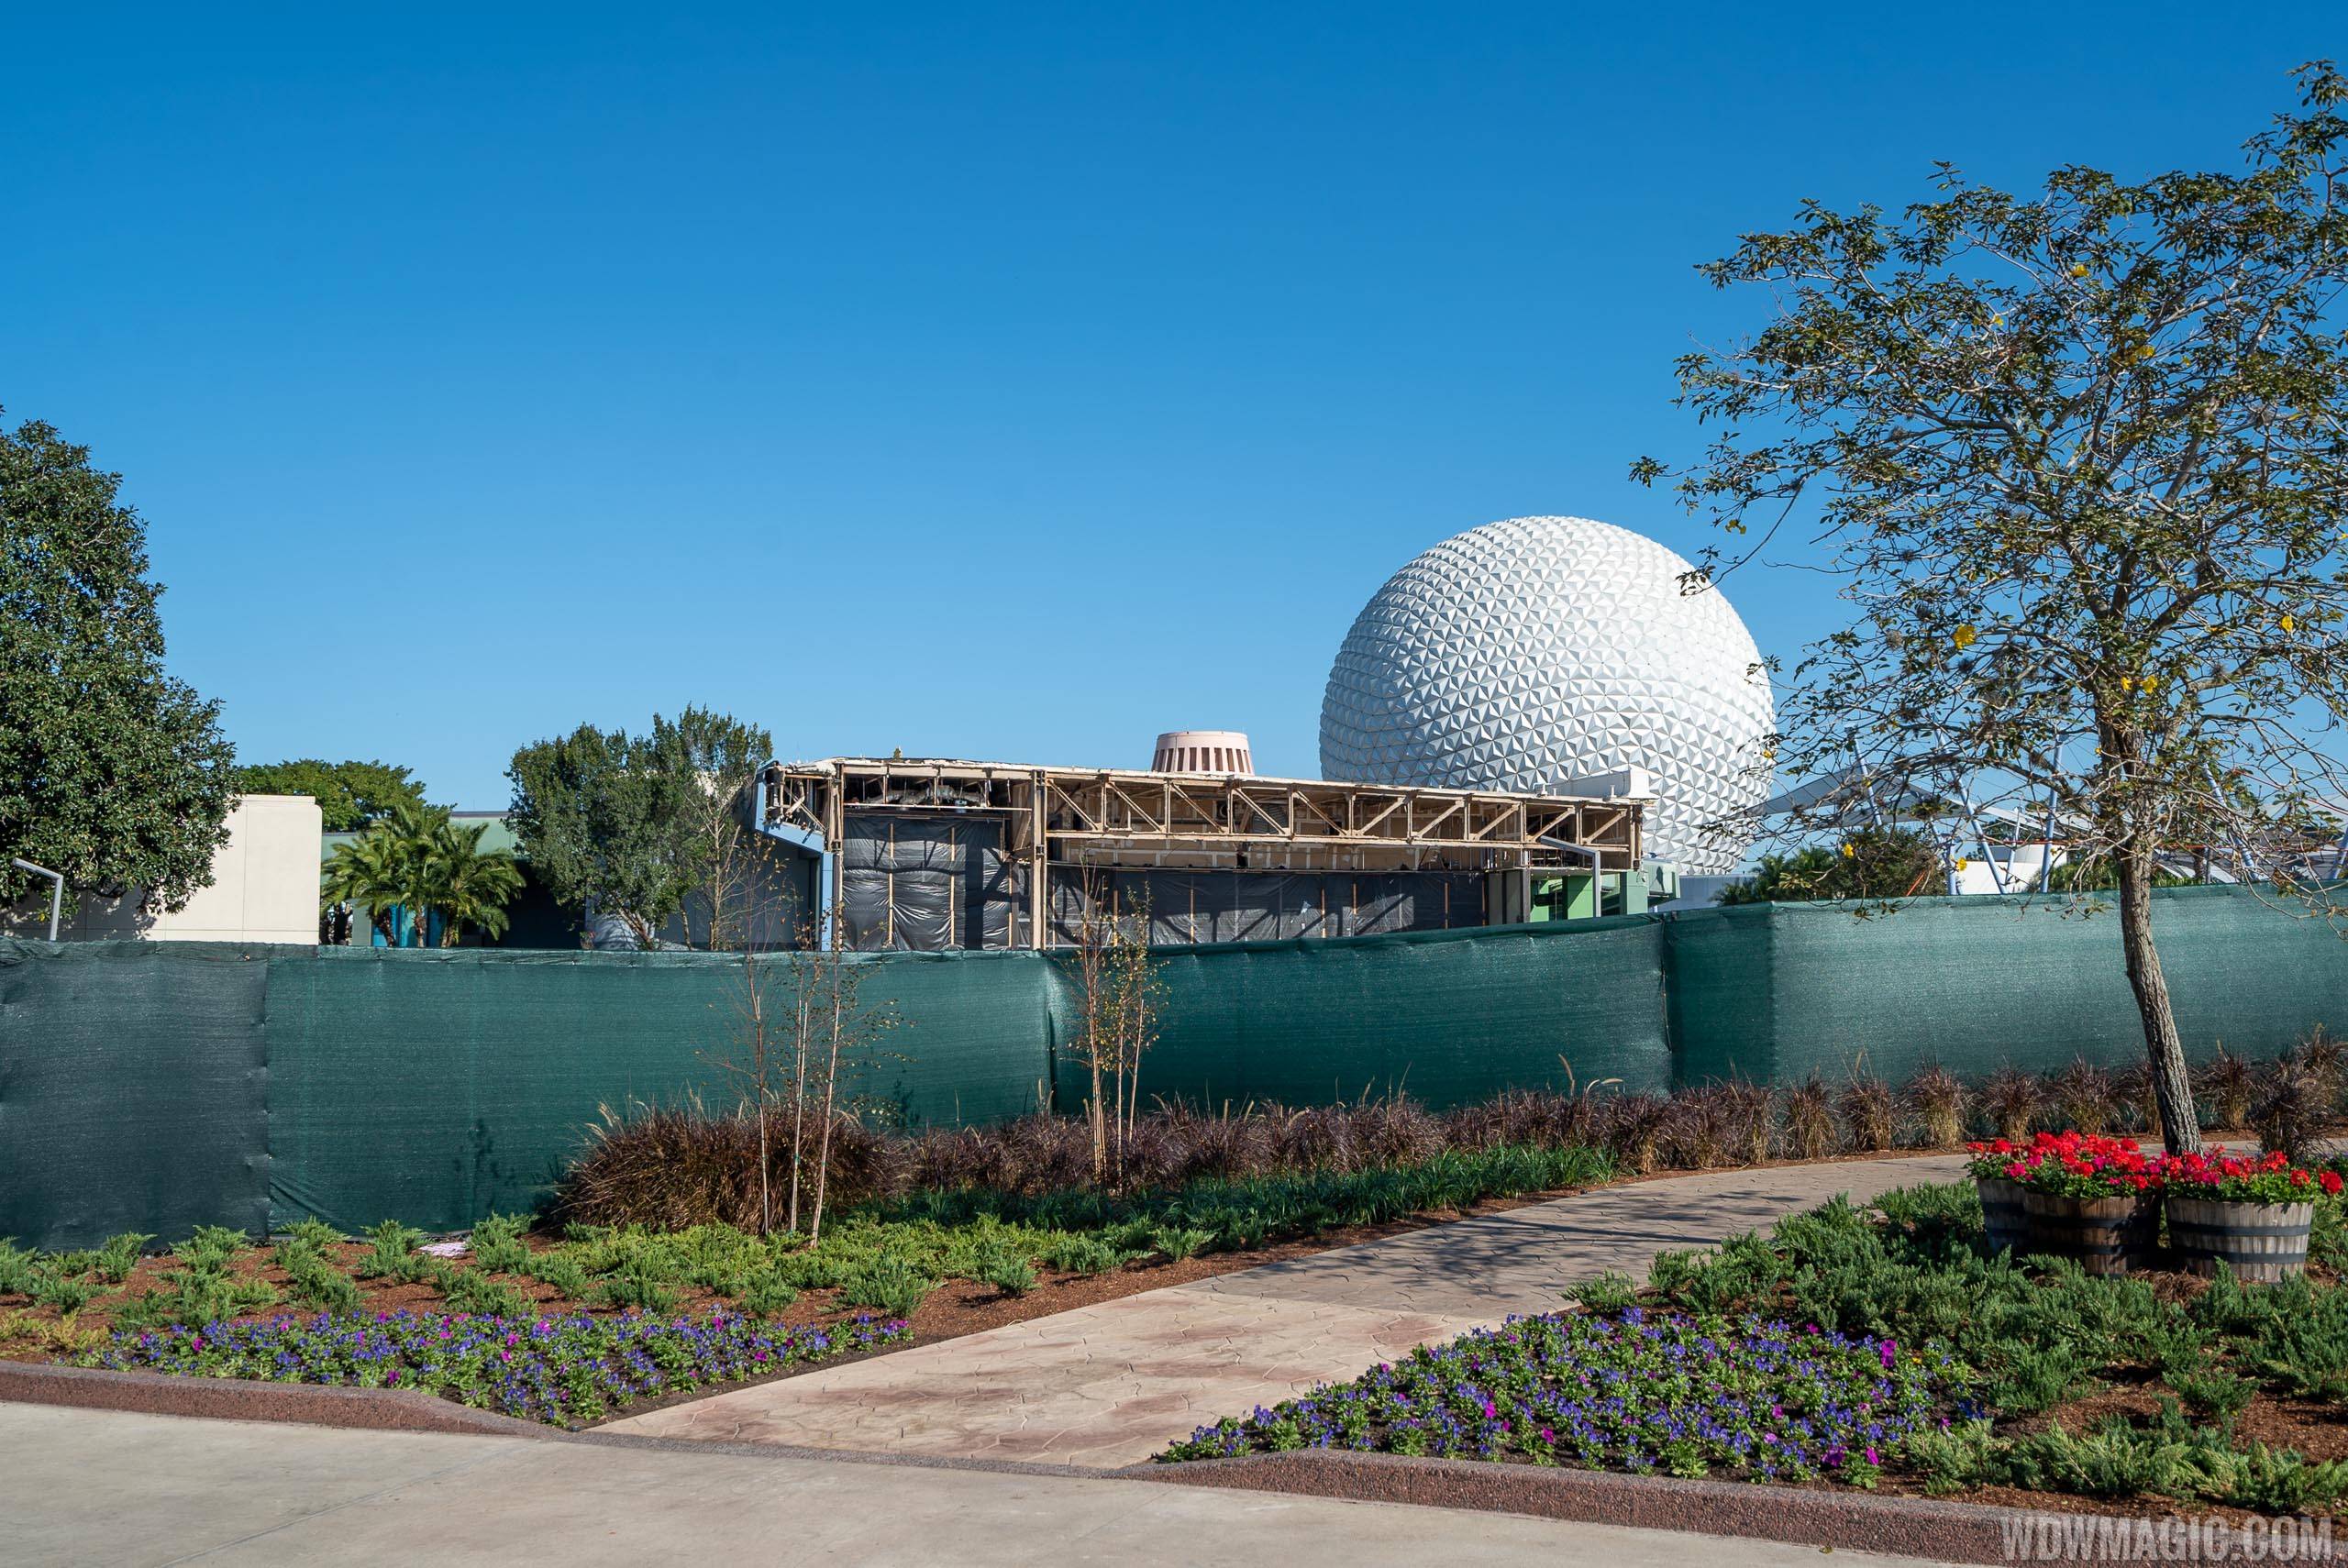 Epcot Future World West Demolition and Construction Walls - January 21 2020